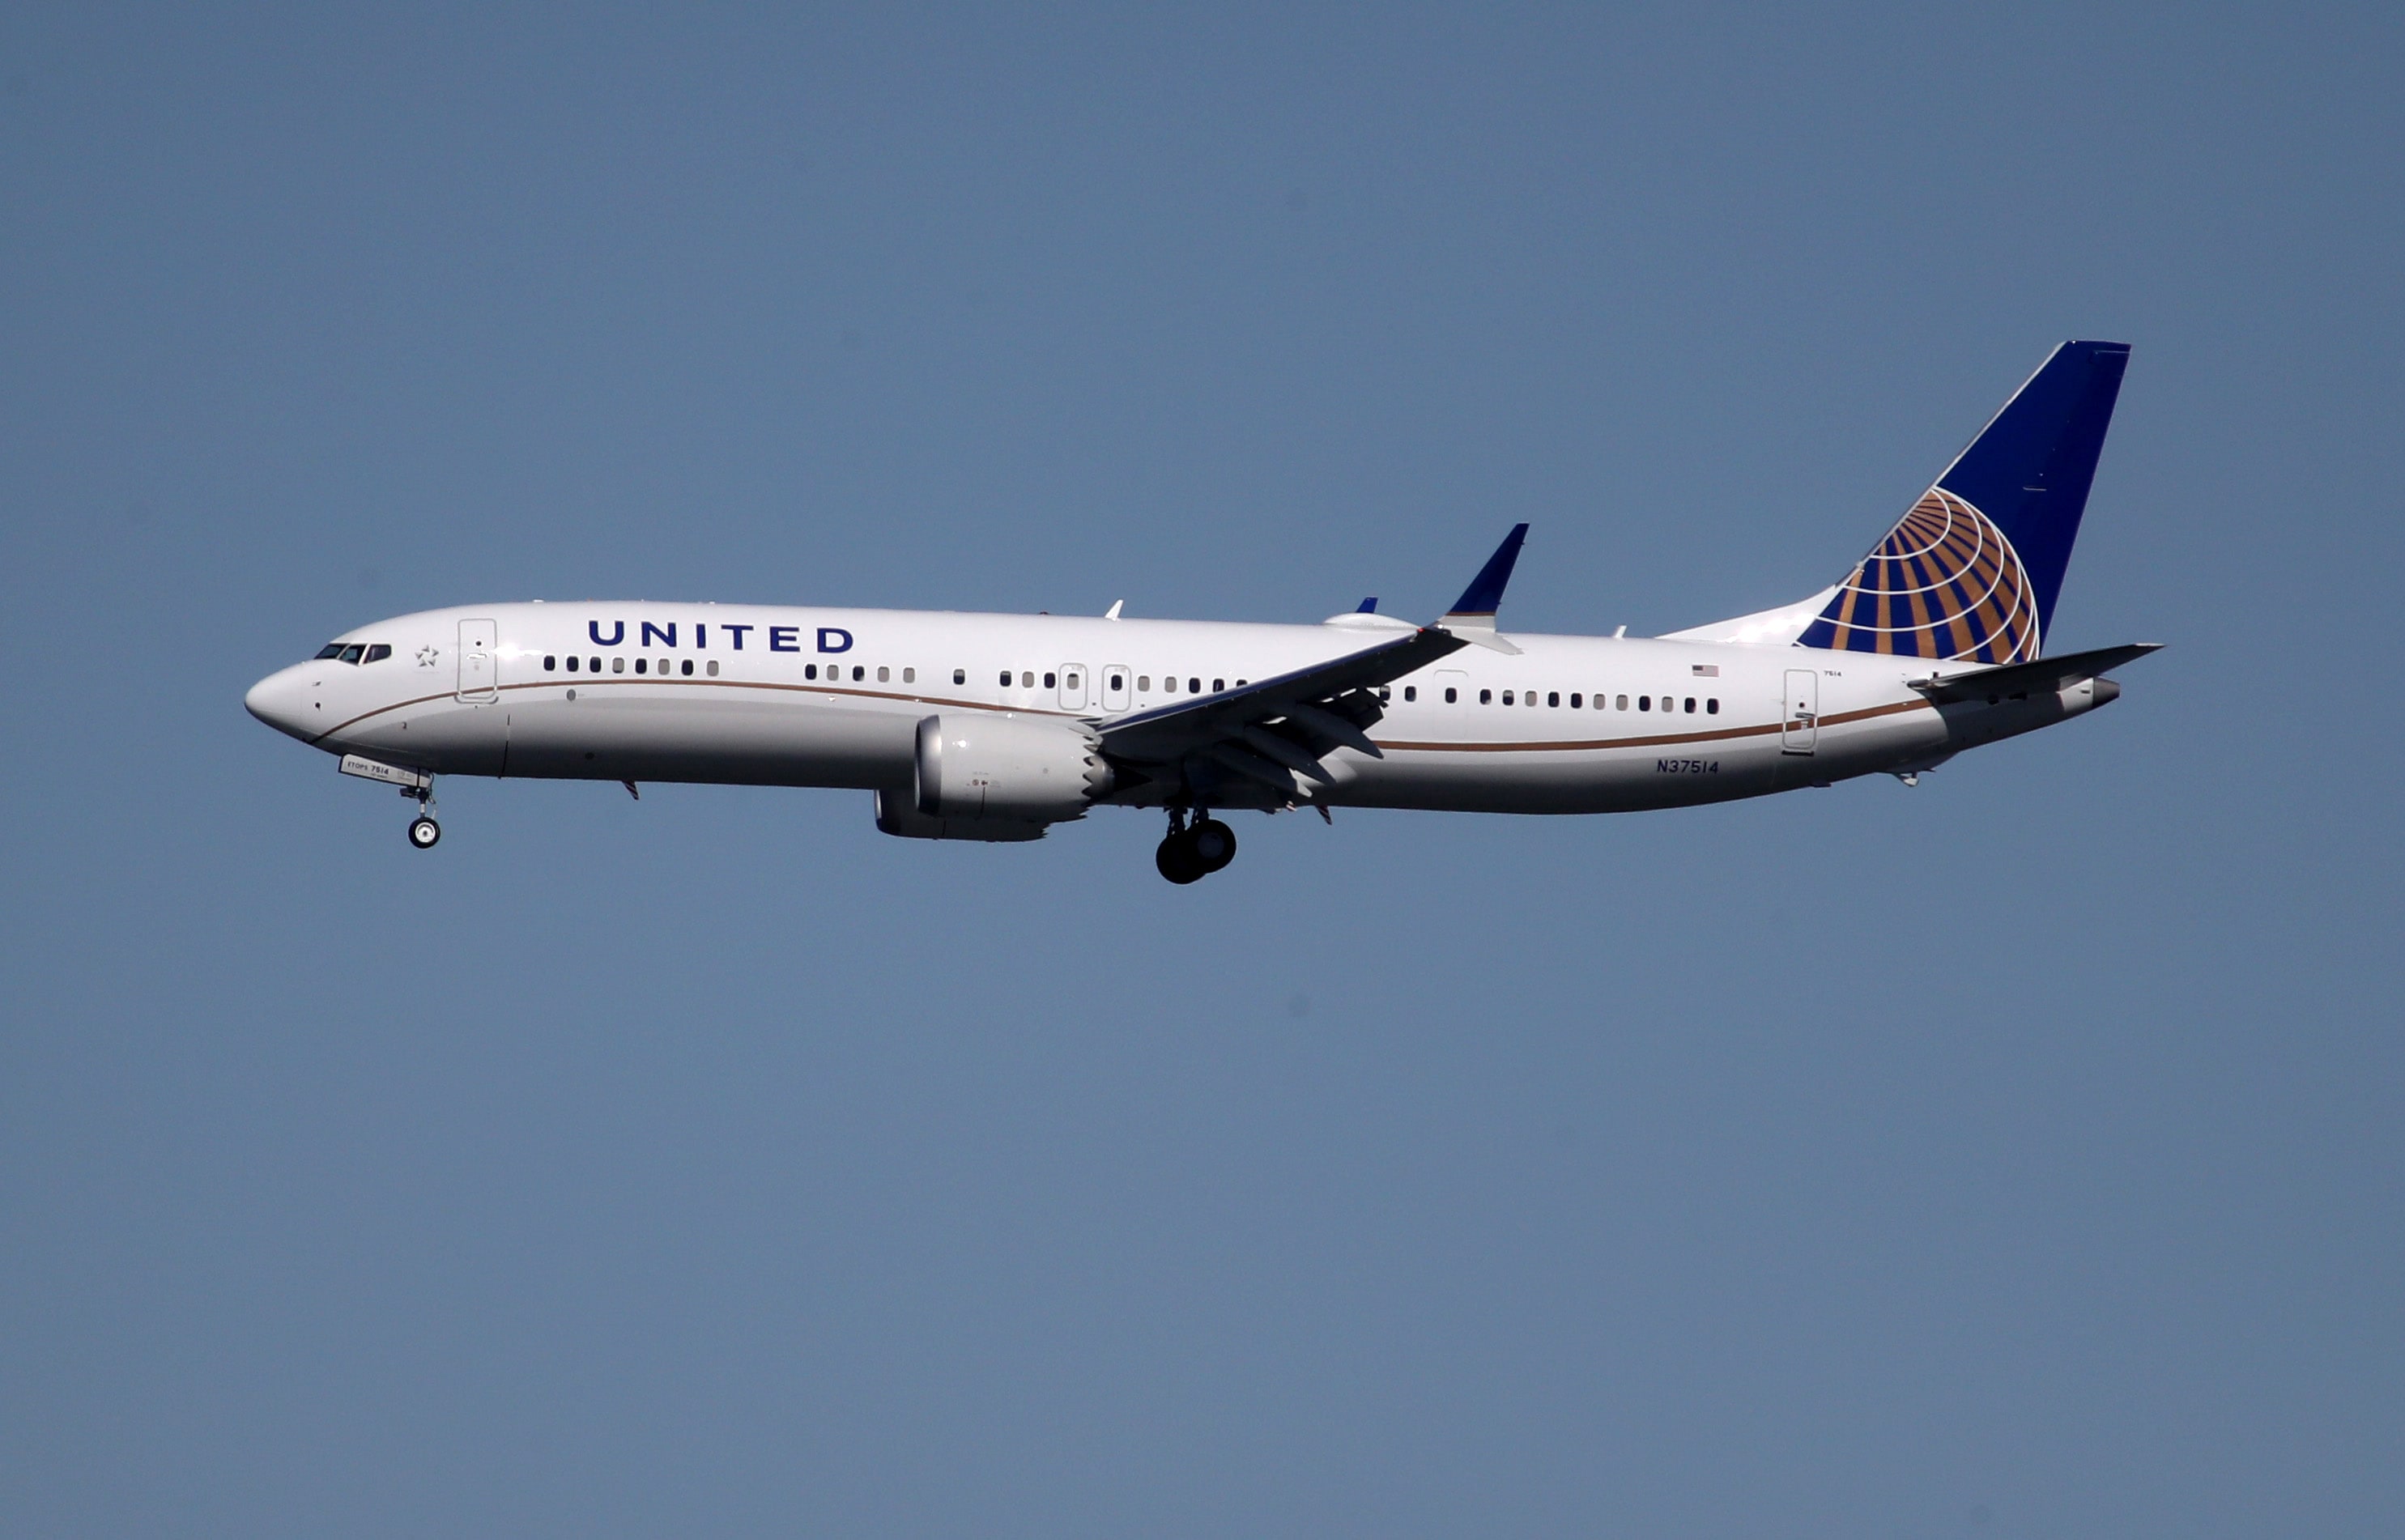 United Airlines offers pilots triple pay to facilitate omicron flight interruptions